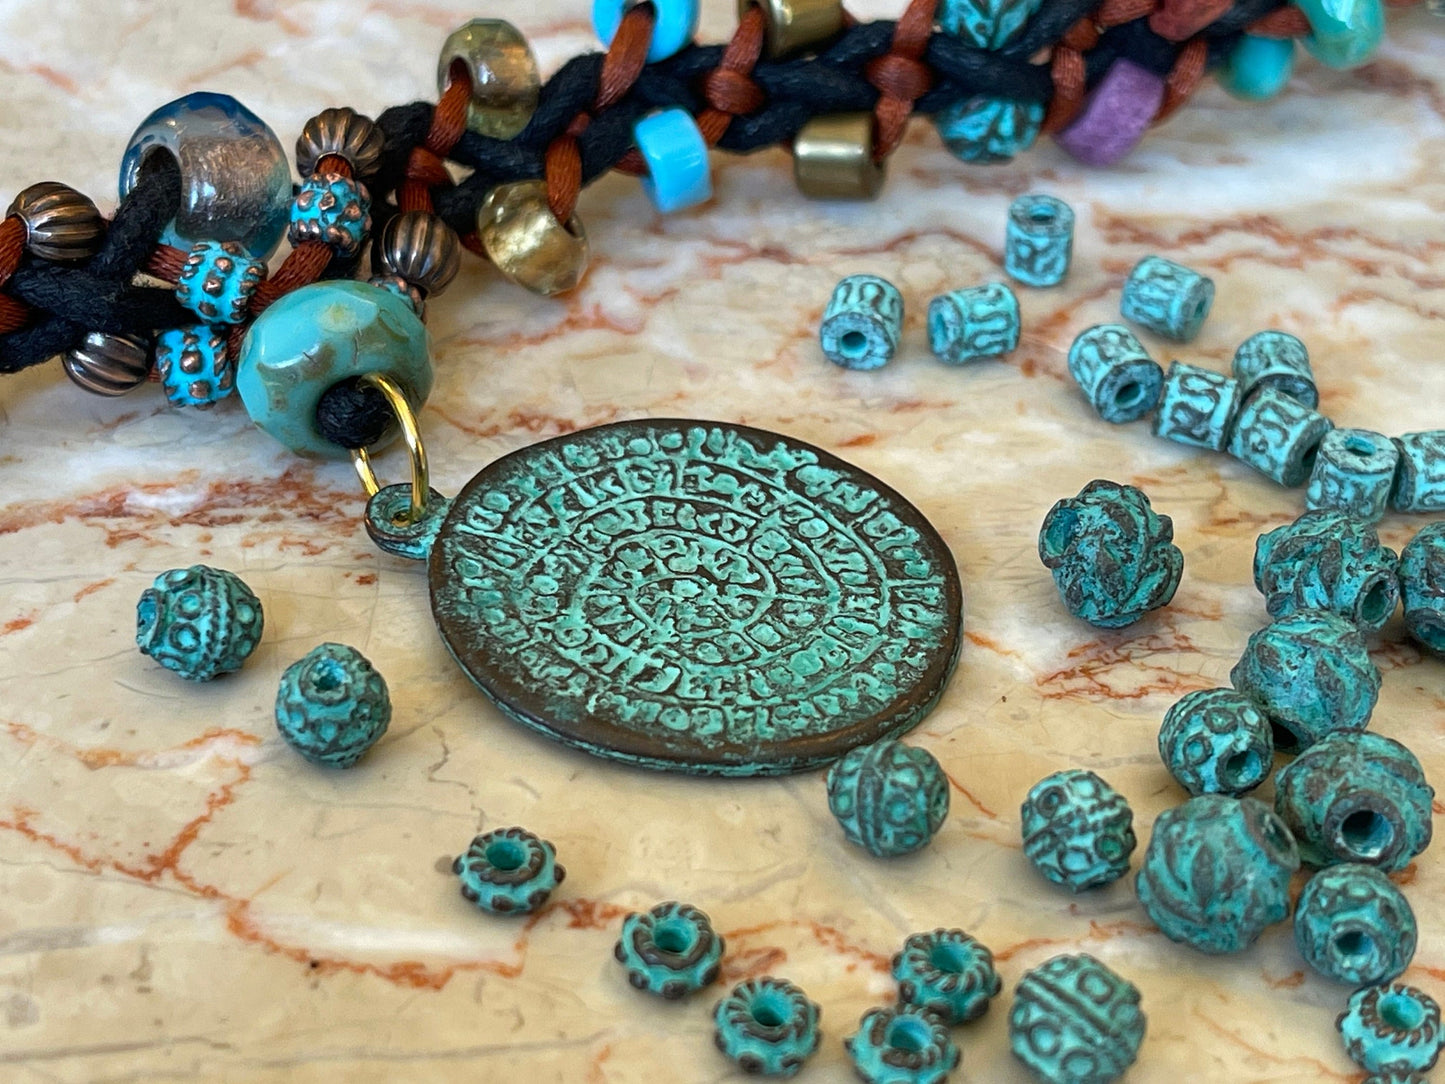 Phaistos Disk pendant charm – cast bronze with a green patina – made in Mykonos Greece – detailed replica of Archaeological artifact